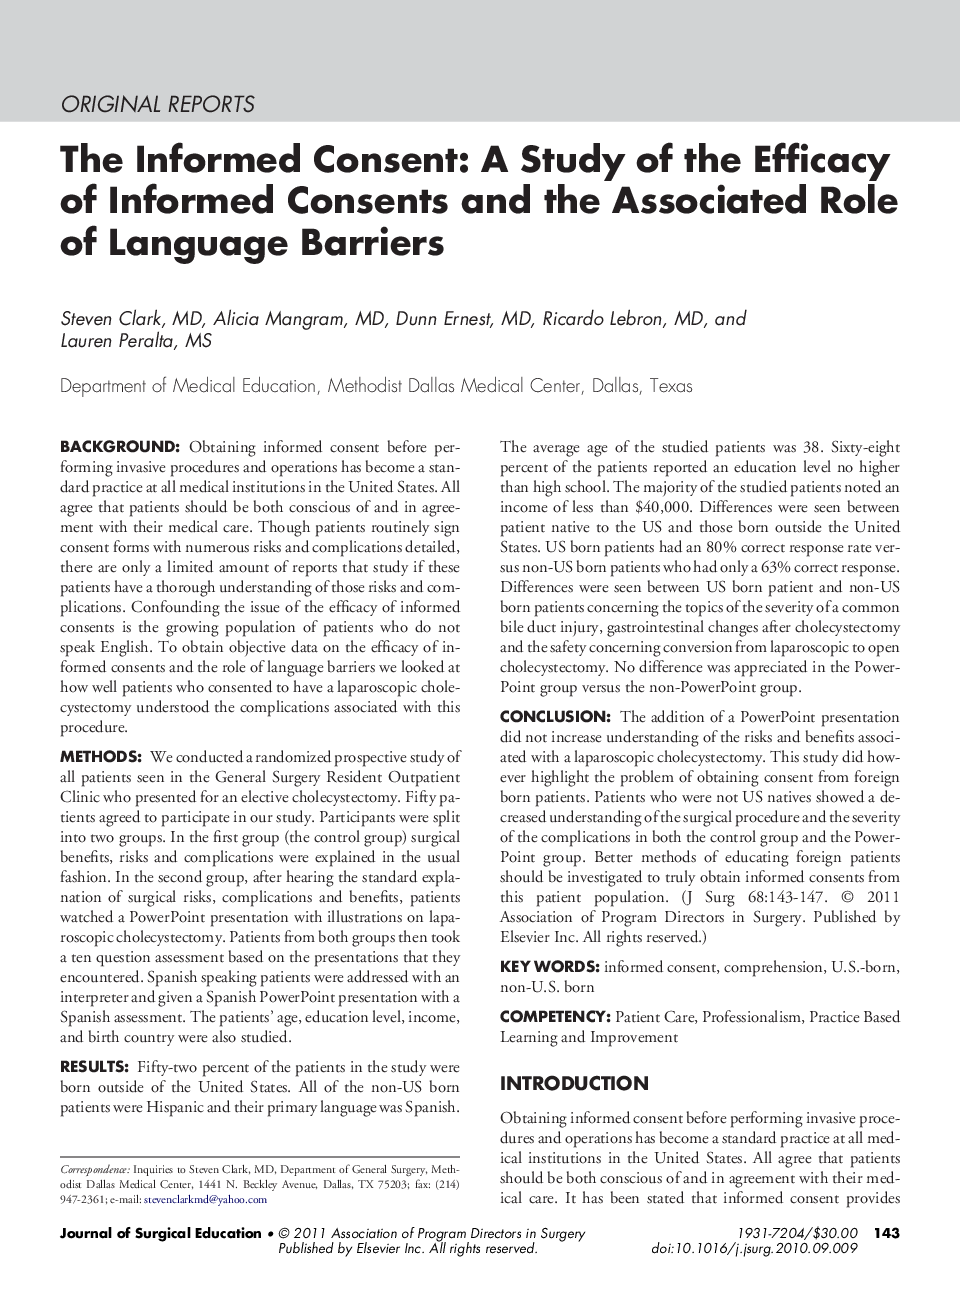 The Informed Consent: A Study of the Efficacy of Informed Consents and the Associated Role of Language Barriers